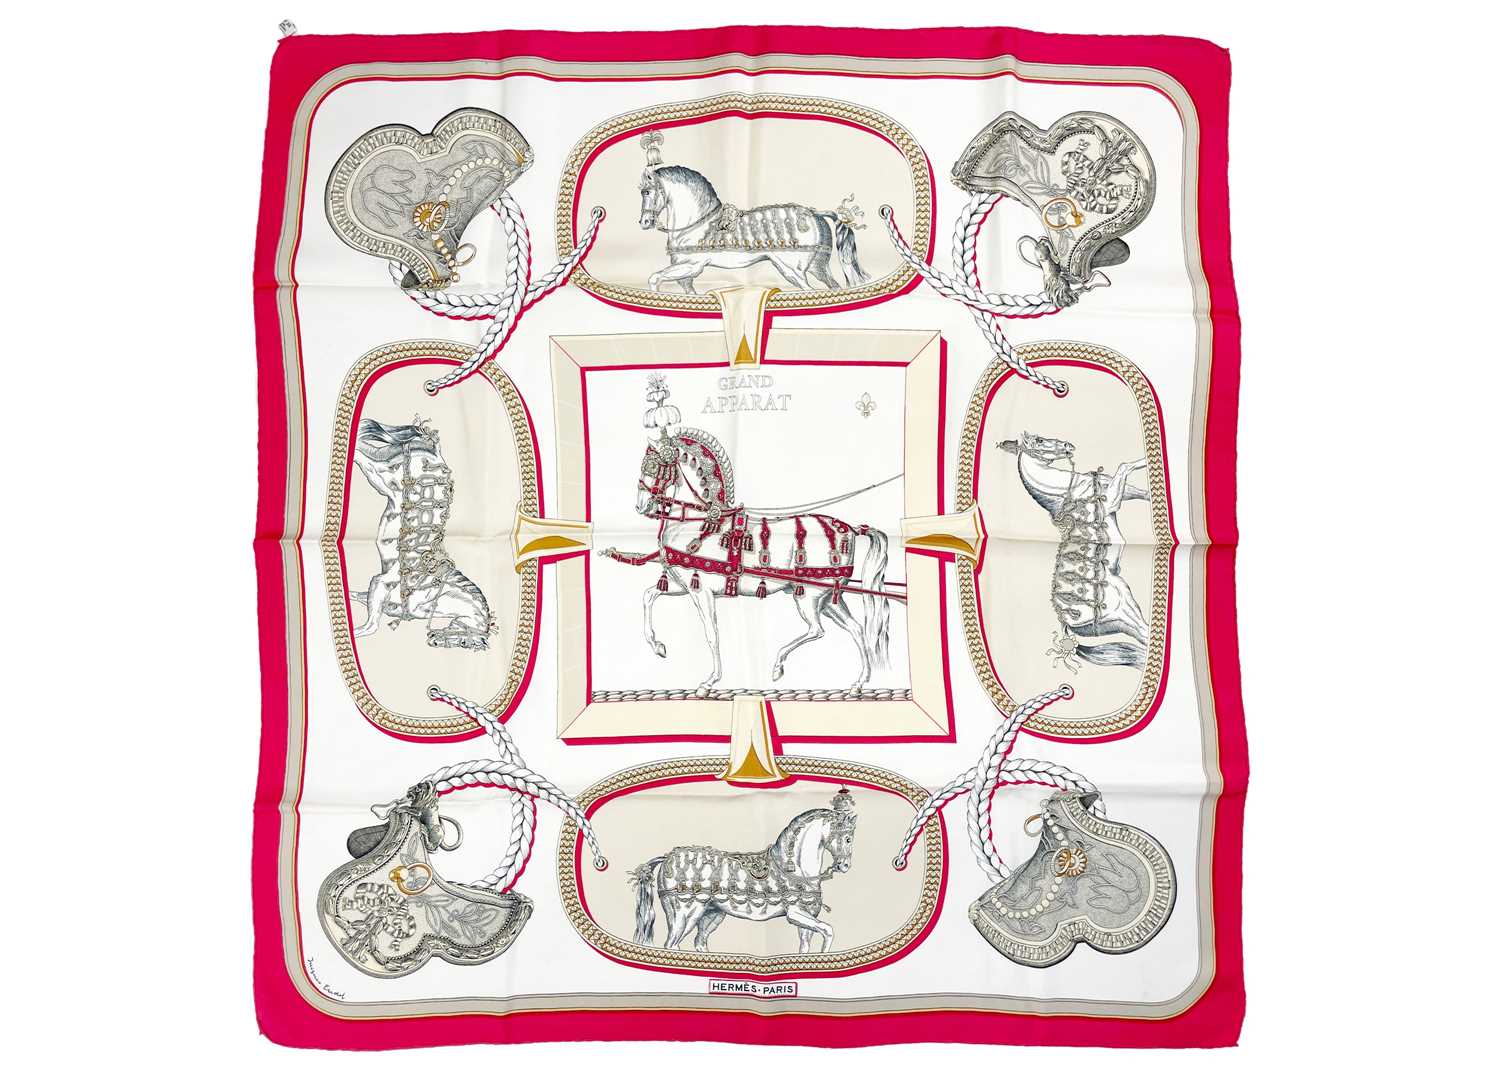 HERMES - A printed silk scarf in 'Grand Apparat' pattern.